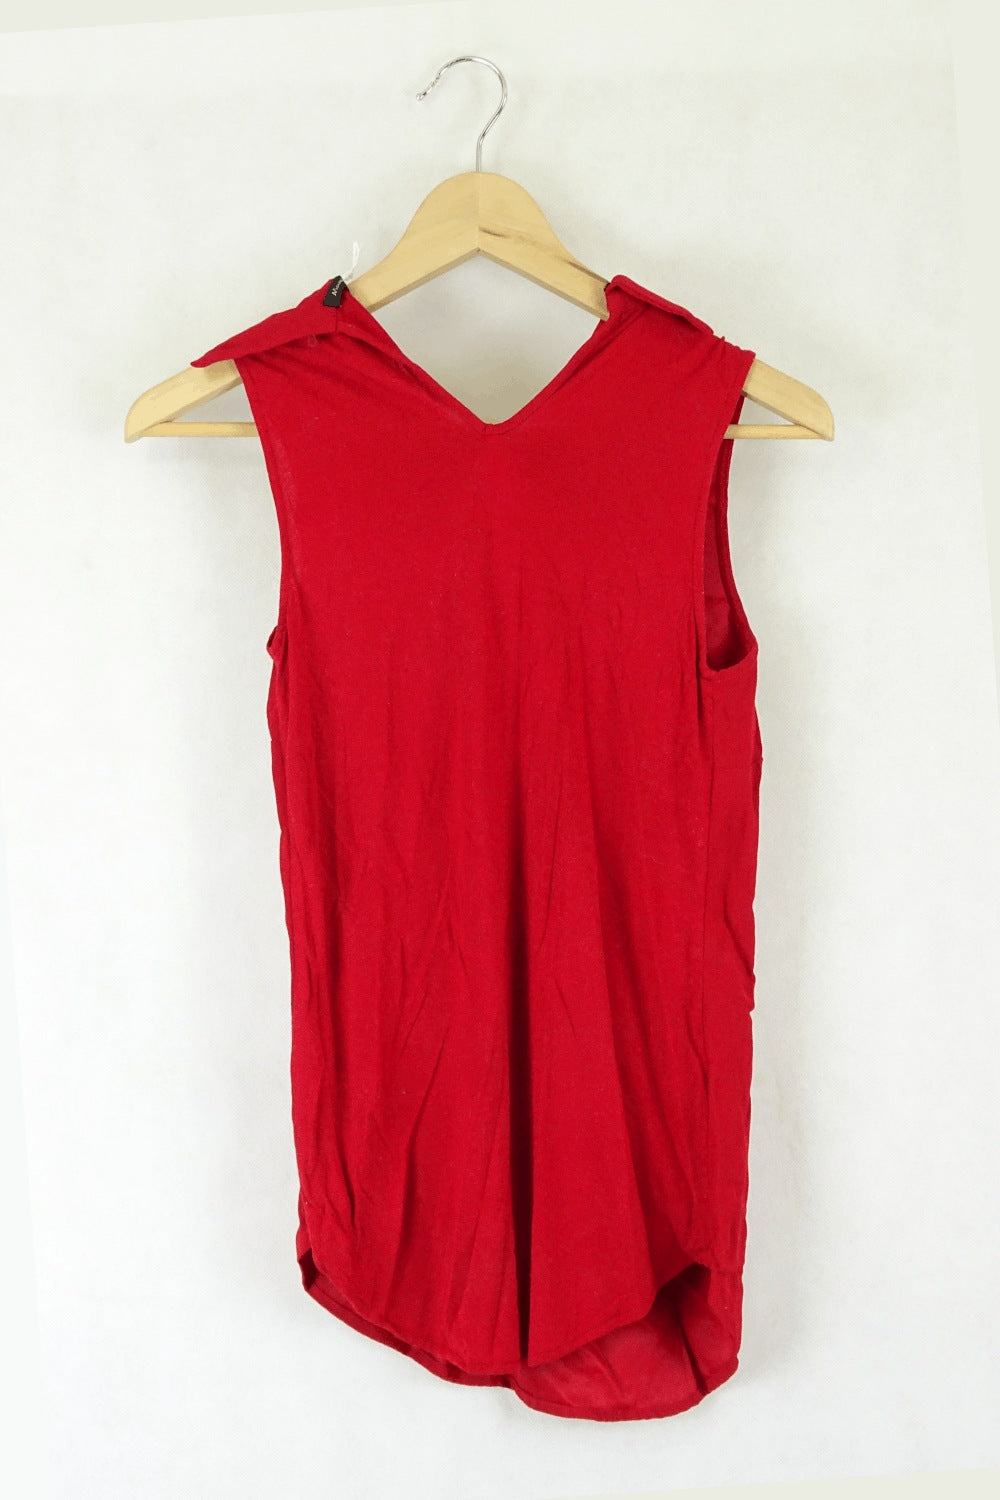 Massimo Datti Red Sleevless Top S